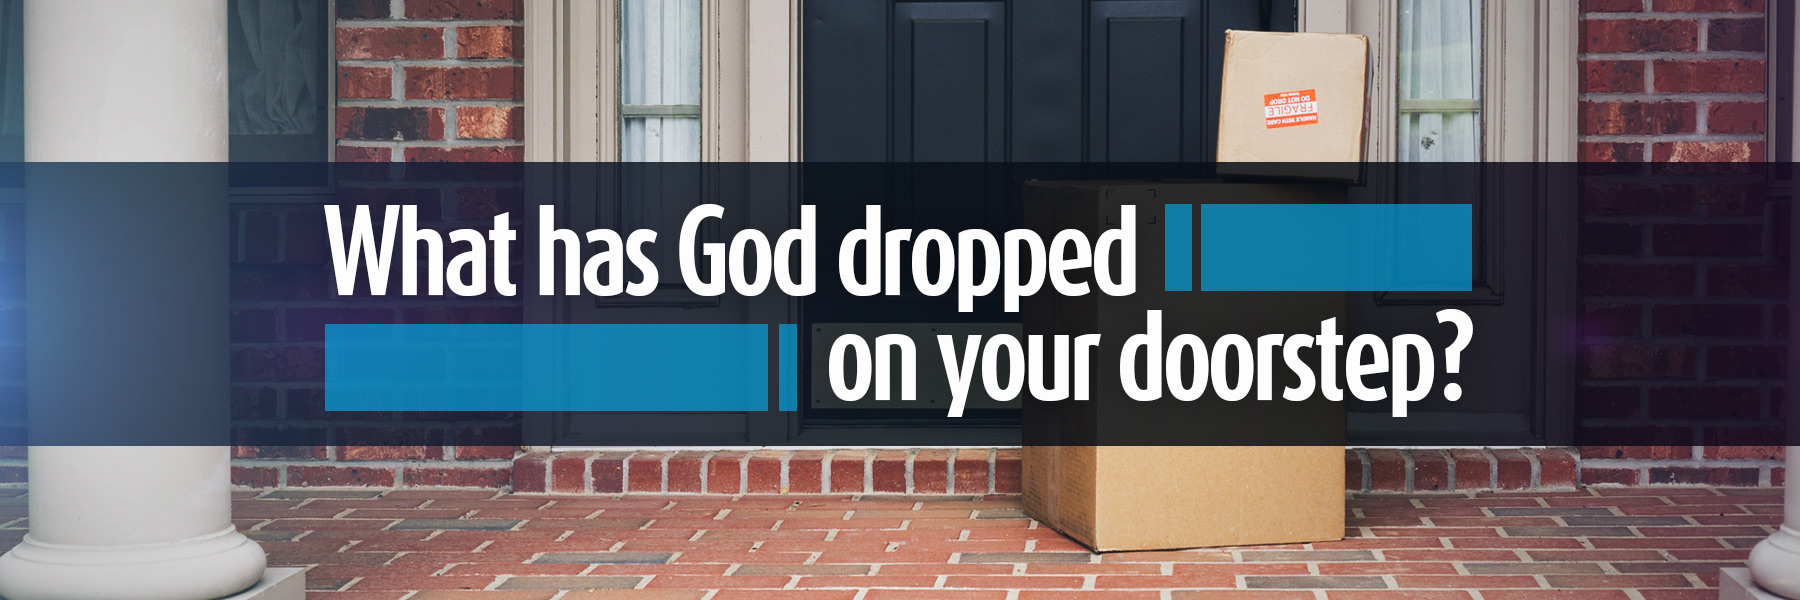 What Has God Dropped on Your Doorstep?